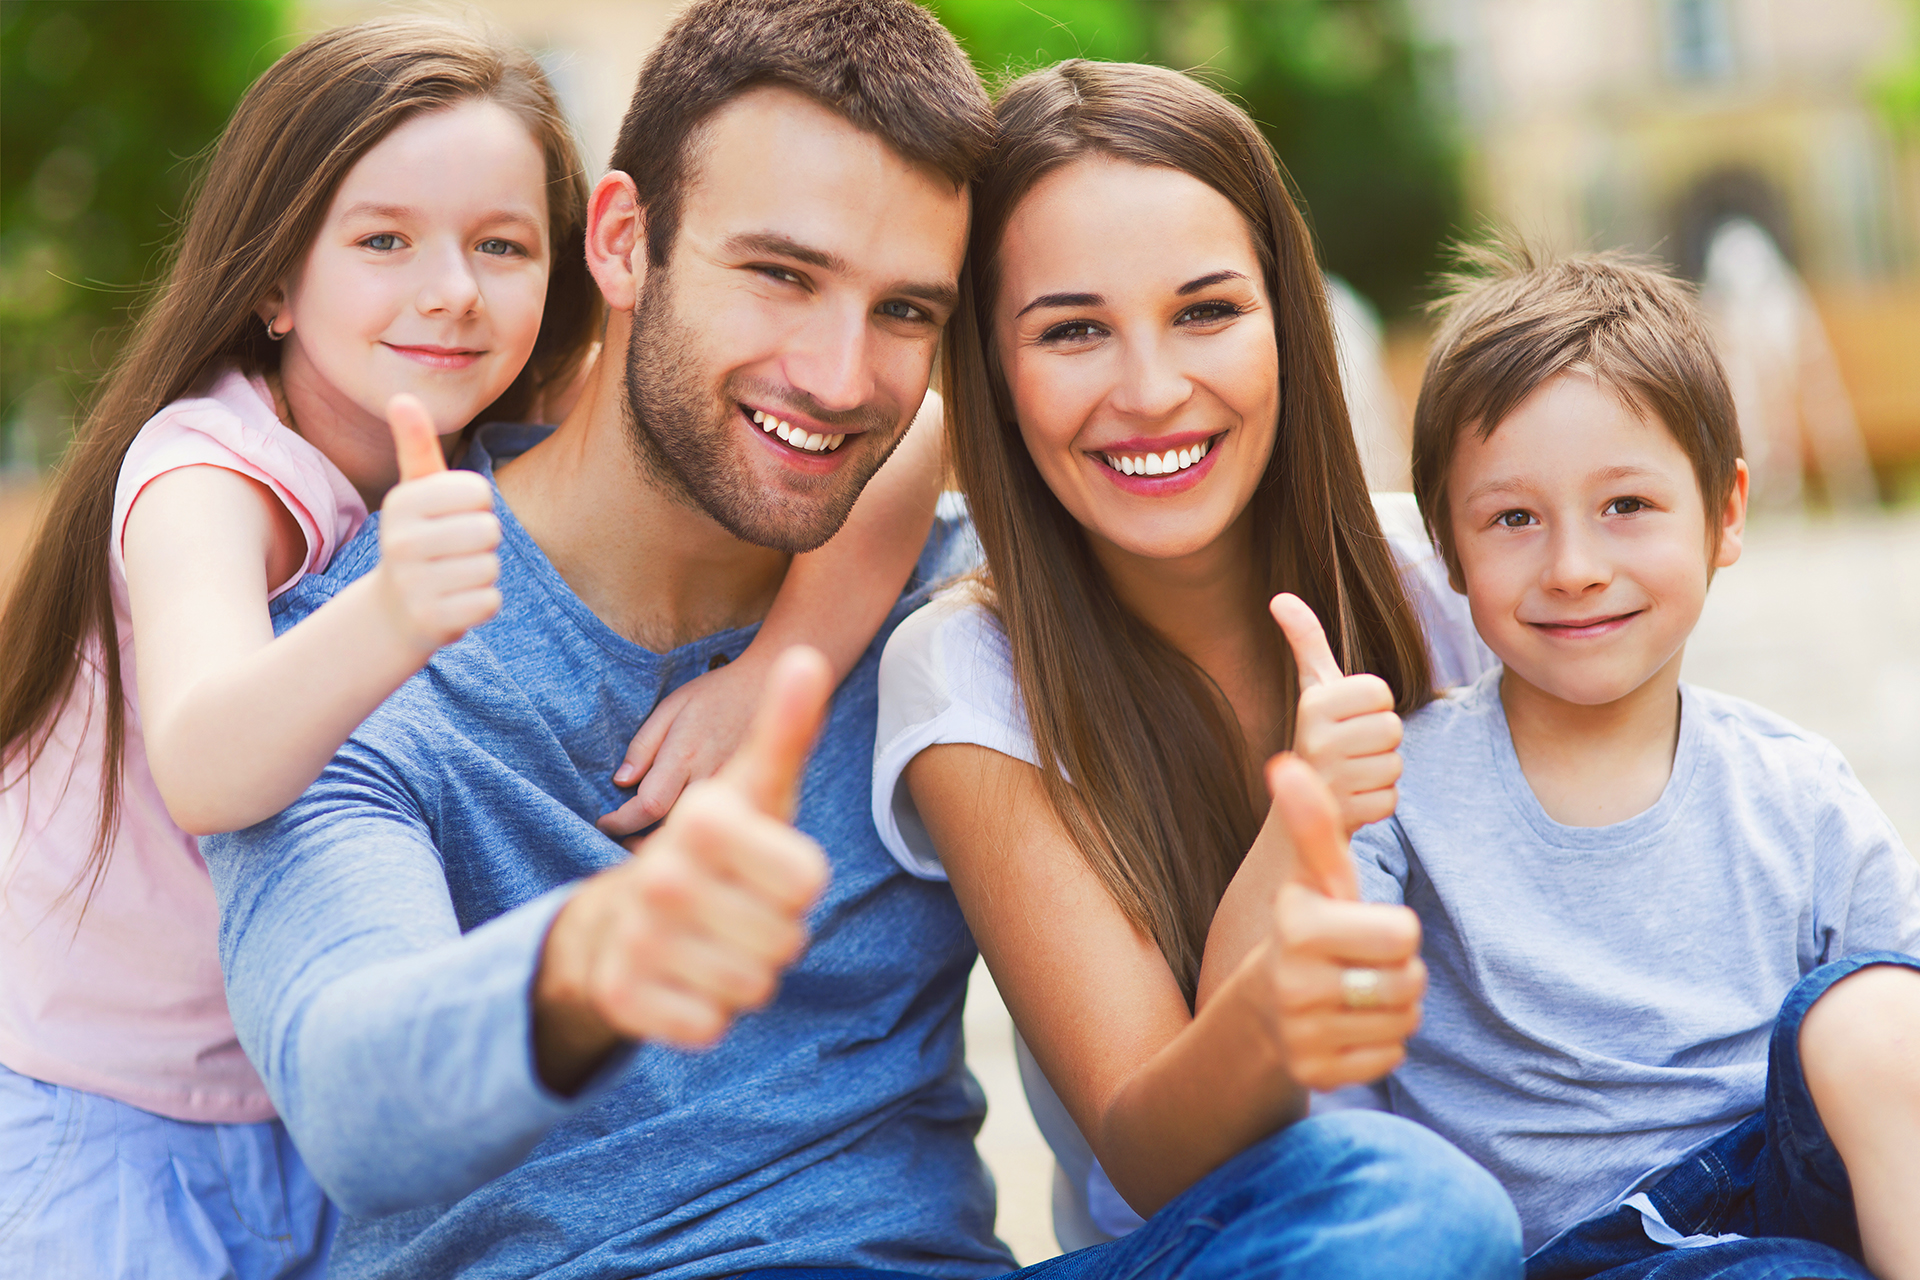 A Family Holding Thumbs Up In Comfort By Knowing the Law Provides Various Family Law Rights